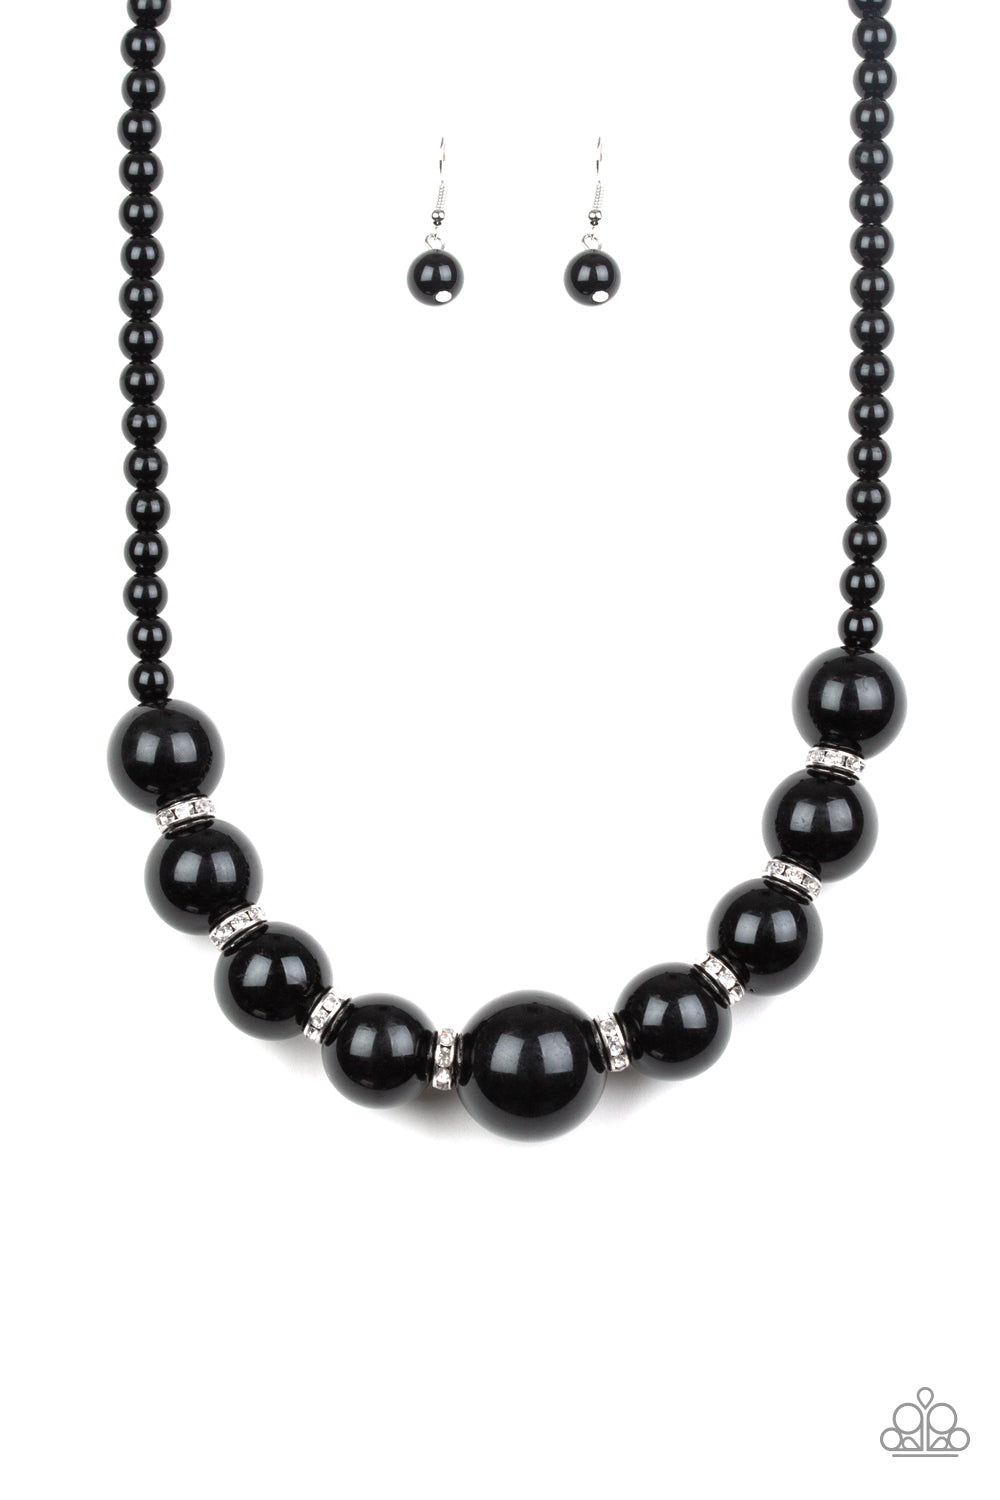 Threaded along an invisible wire, classic black beads give way to an alternating collection of oversized black beads and white rhinestone encrusted rings below the collar for a timeless sparkle. Features an adjustable clasp closure.